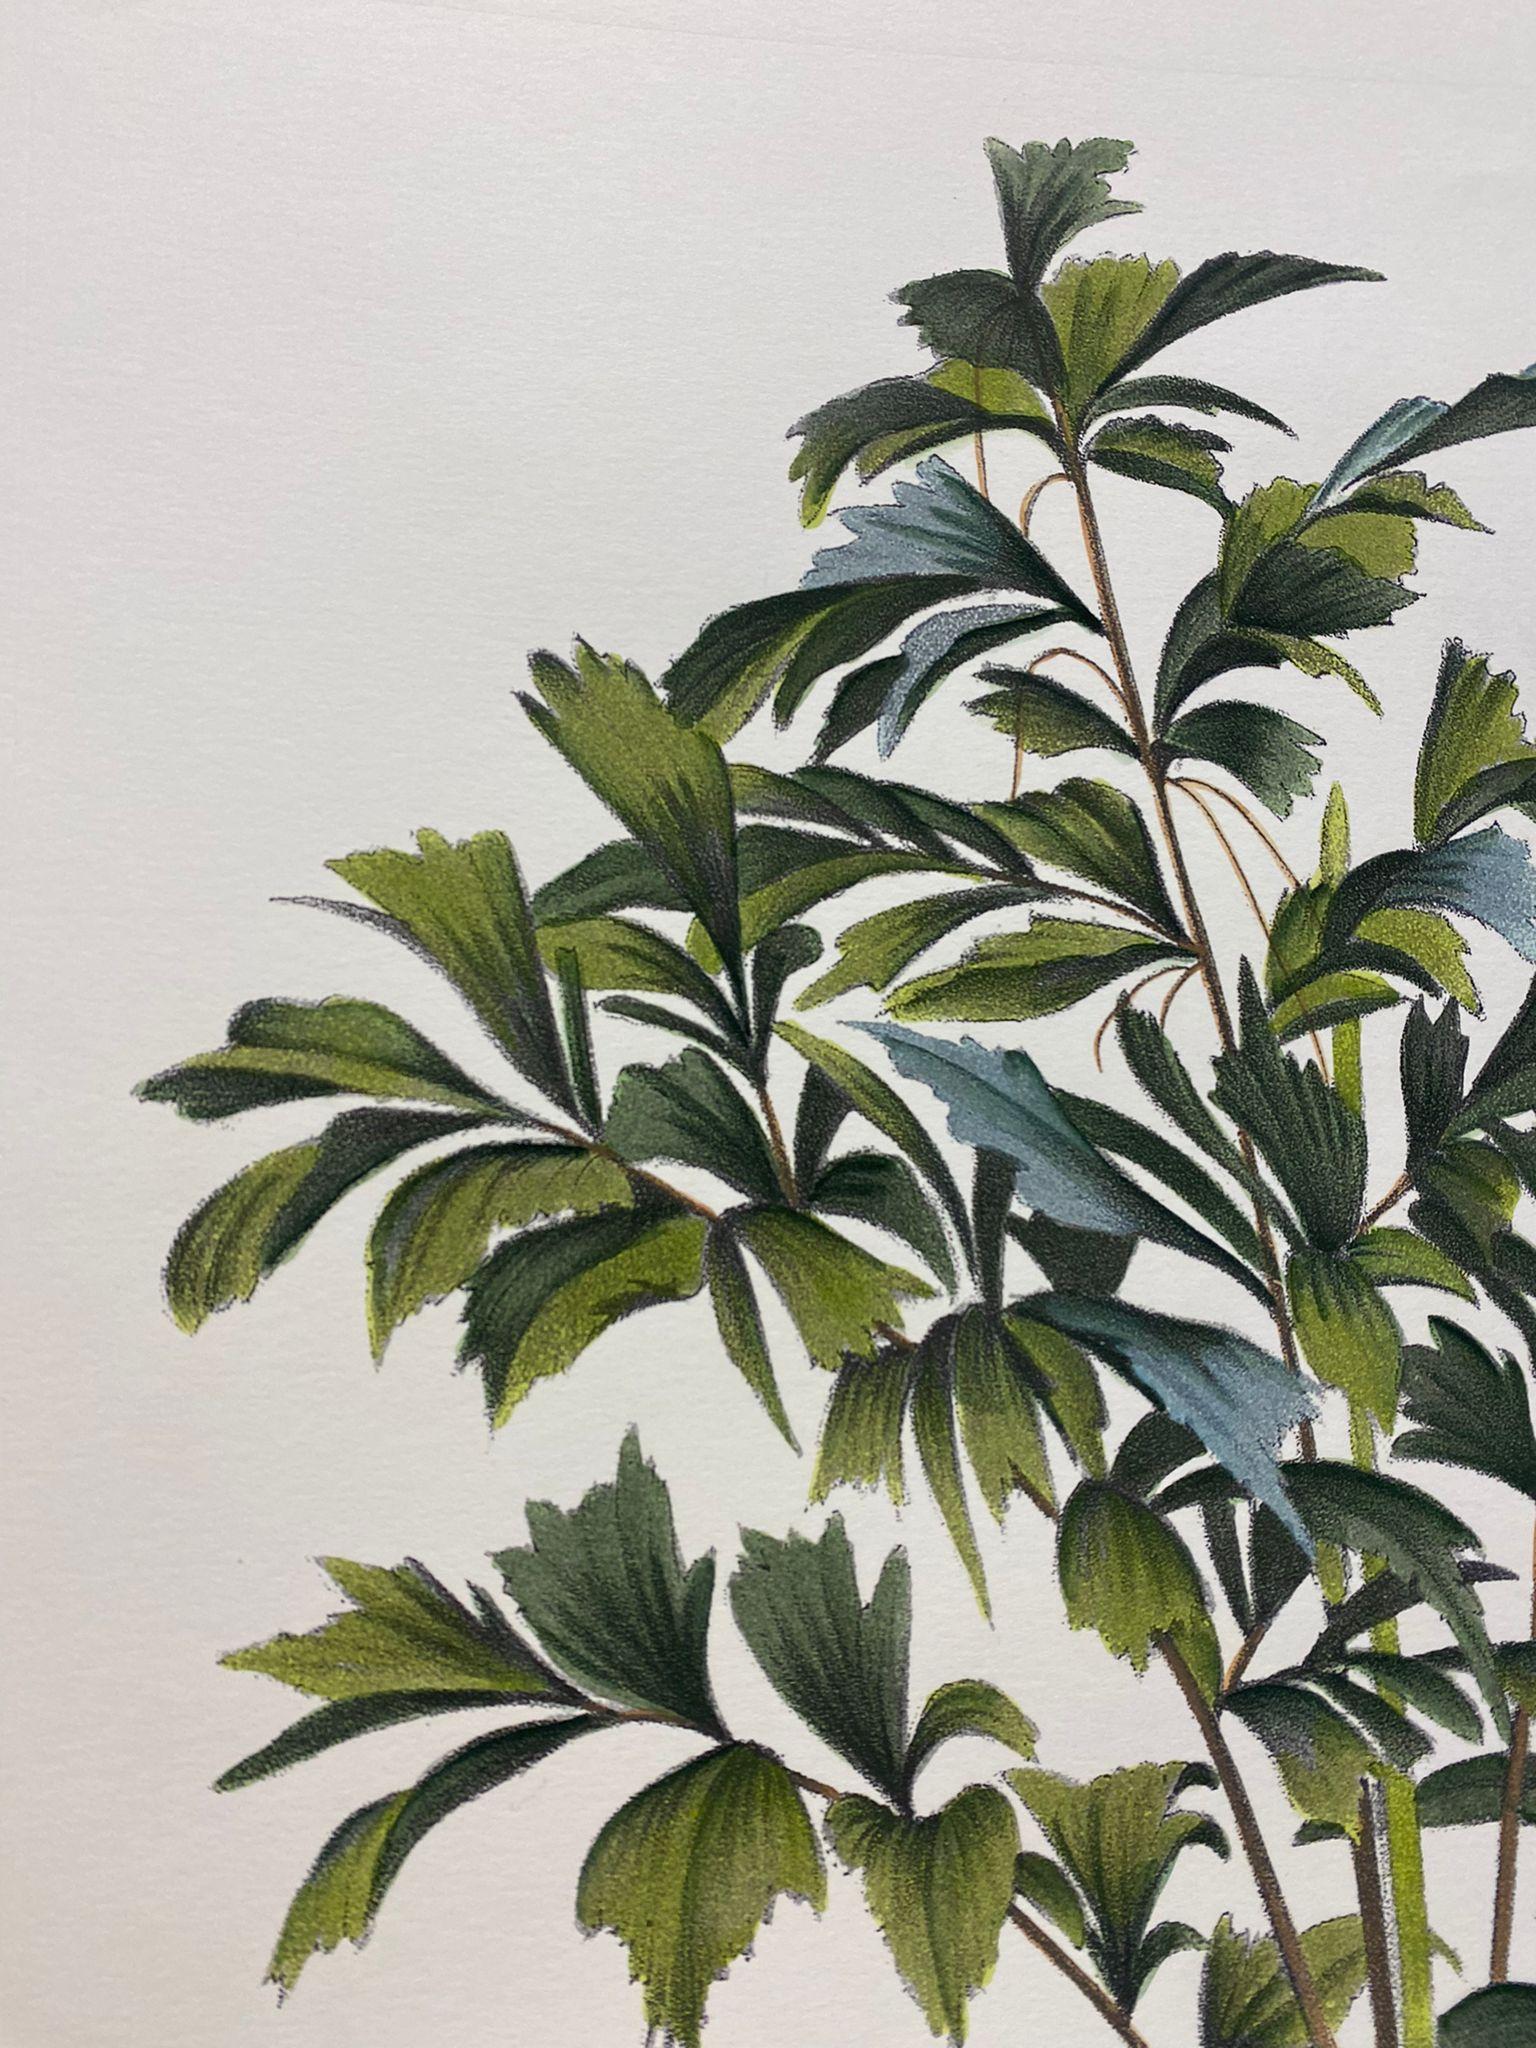 Elegant hand-watercoloured print representing Caryota Sobolifera, of the palms family.

This botanical style print is available in 2 different natural representations to create a bright and joyful composition:
- Martinezia Lindeniana
- Caryota